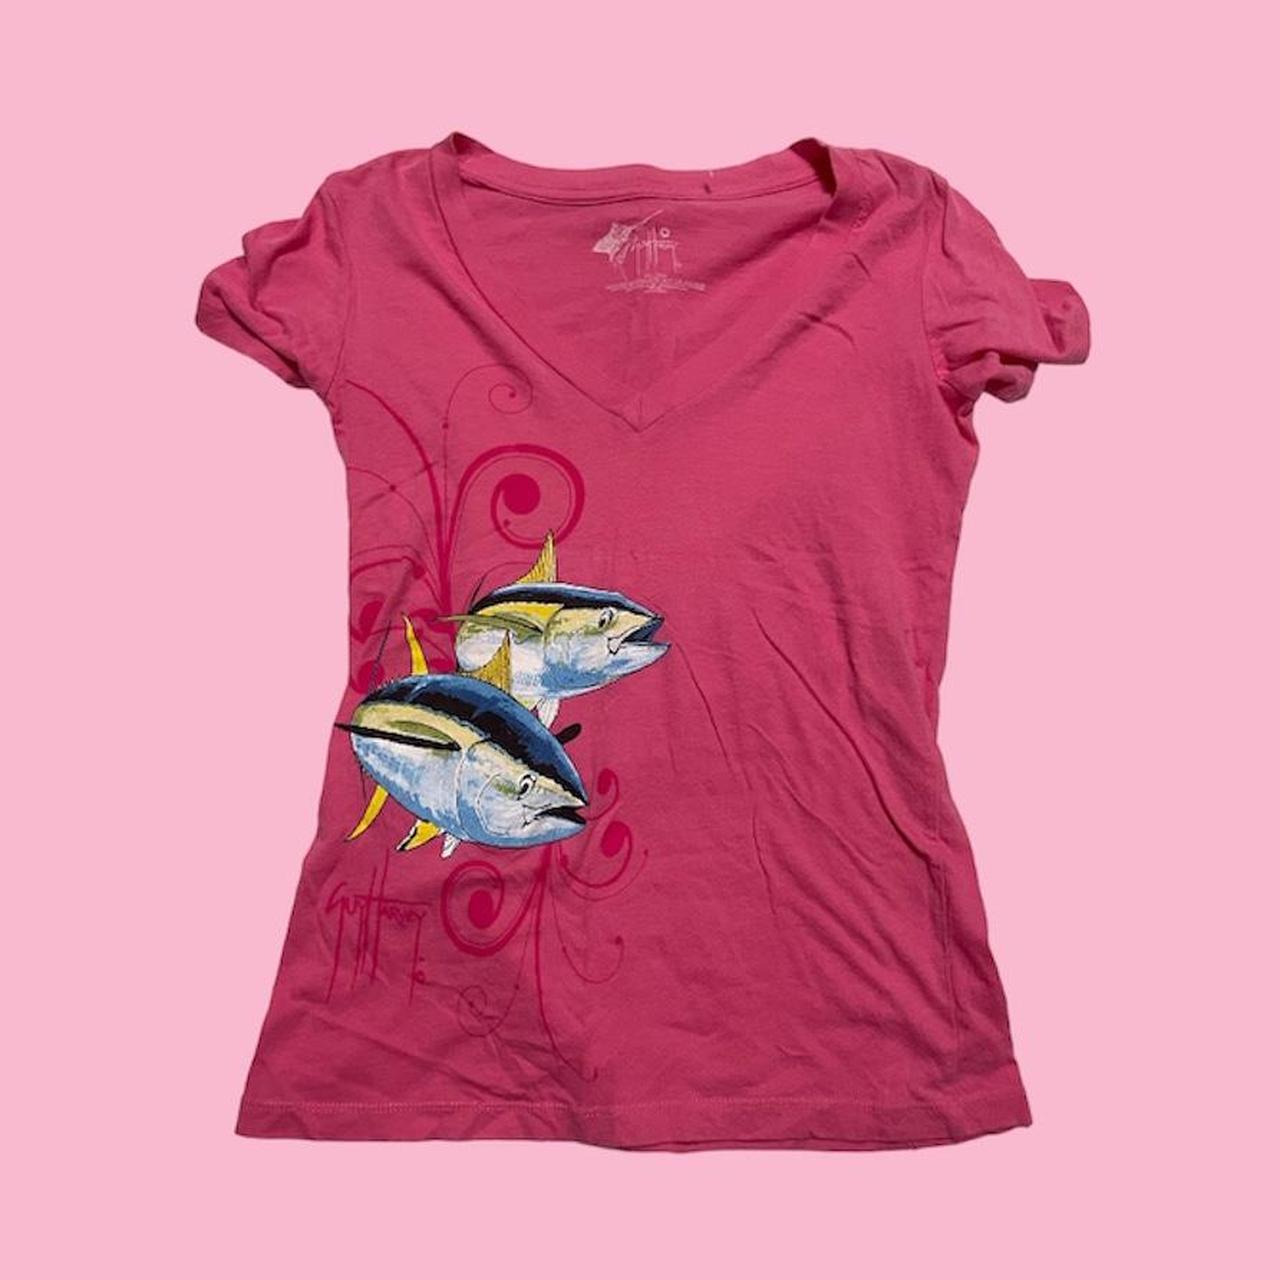 Guy Harvey Women's Pink and Blue Shirt